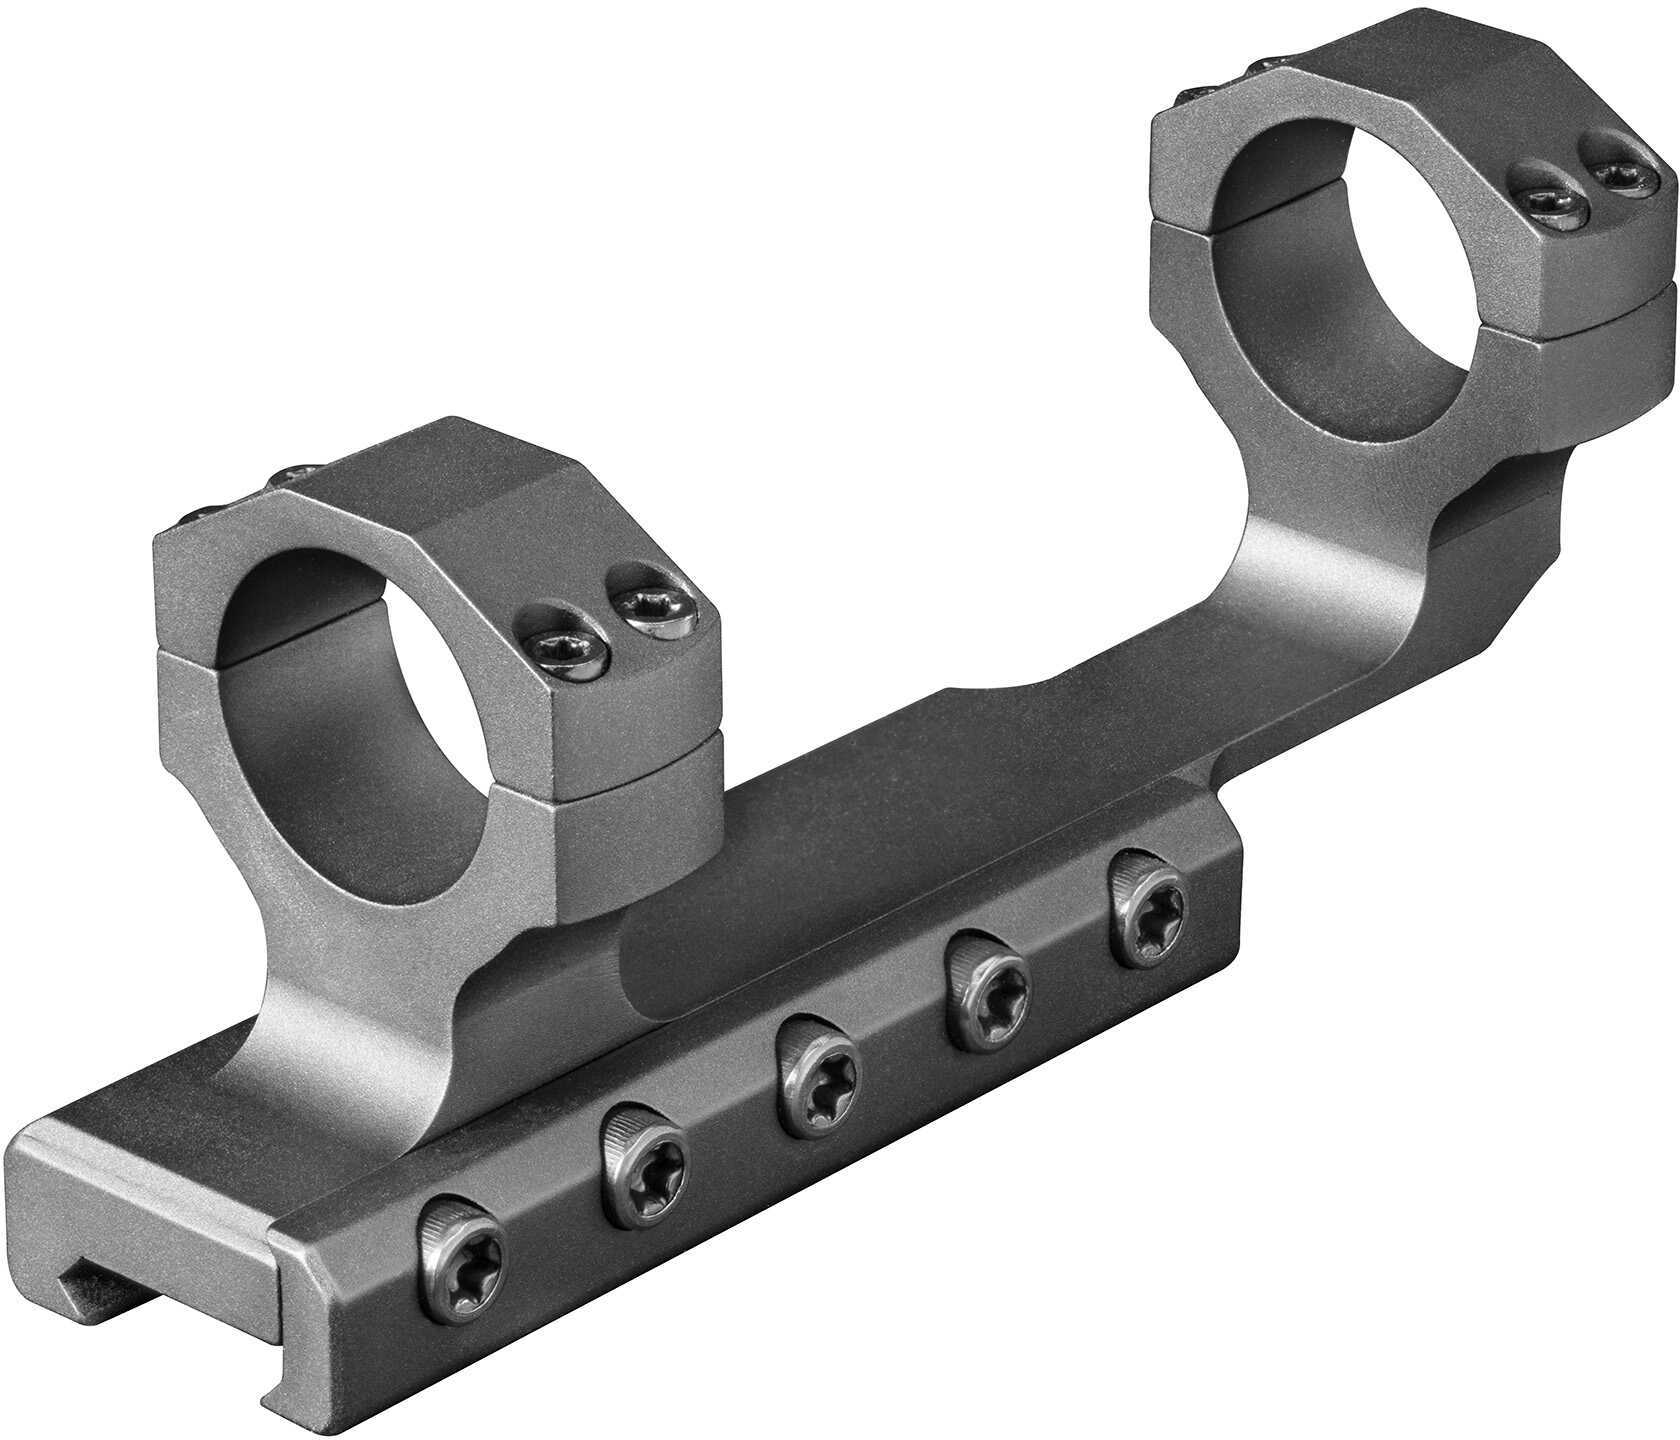 Leupold 177093 Mark AR Integral Mounting System 1-Pc Base & 1" Ring Combo For AR- Style Rifle Black Matte Finish